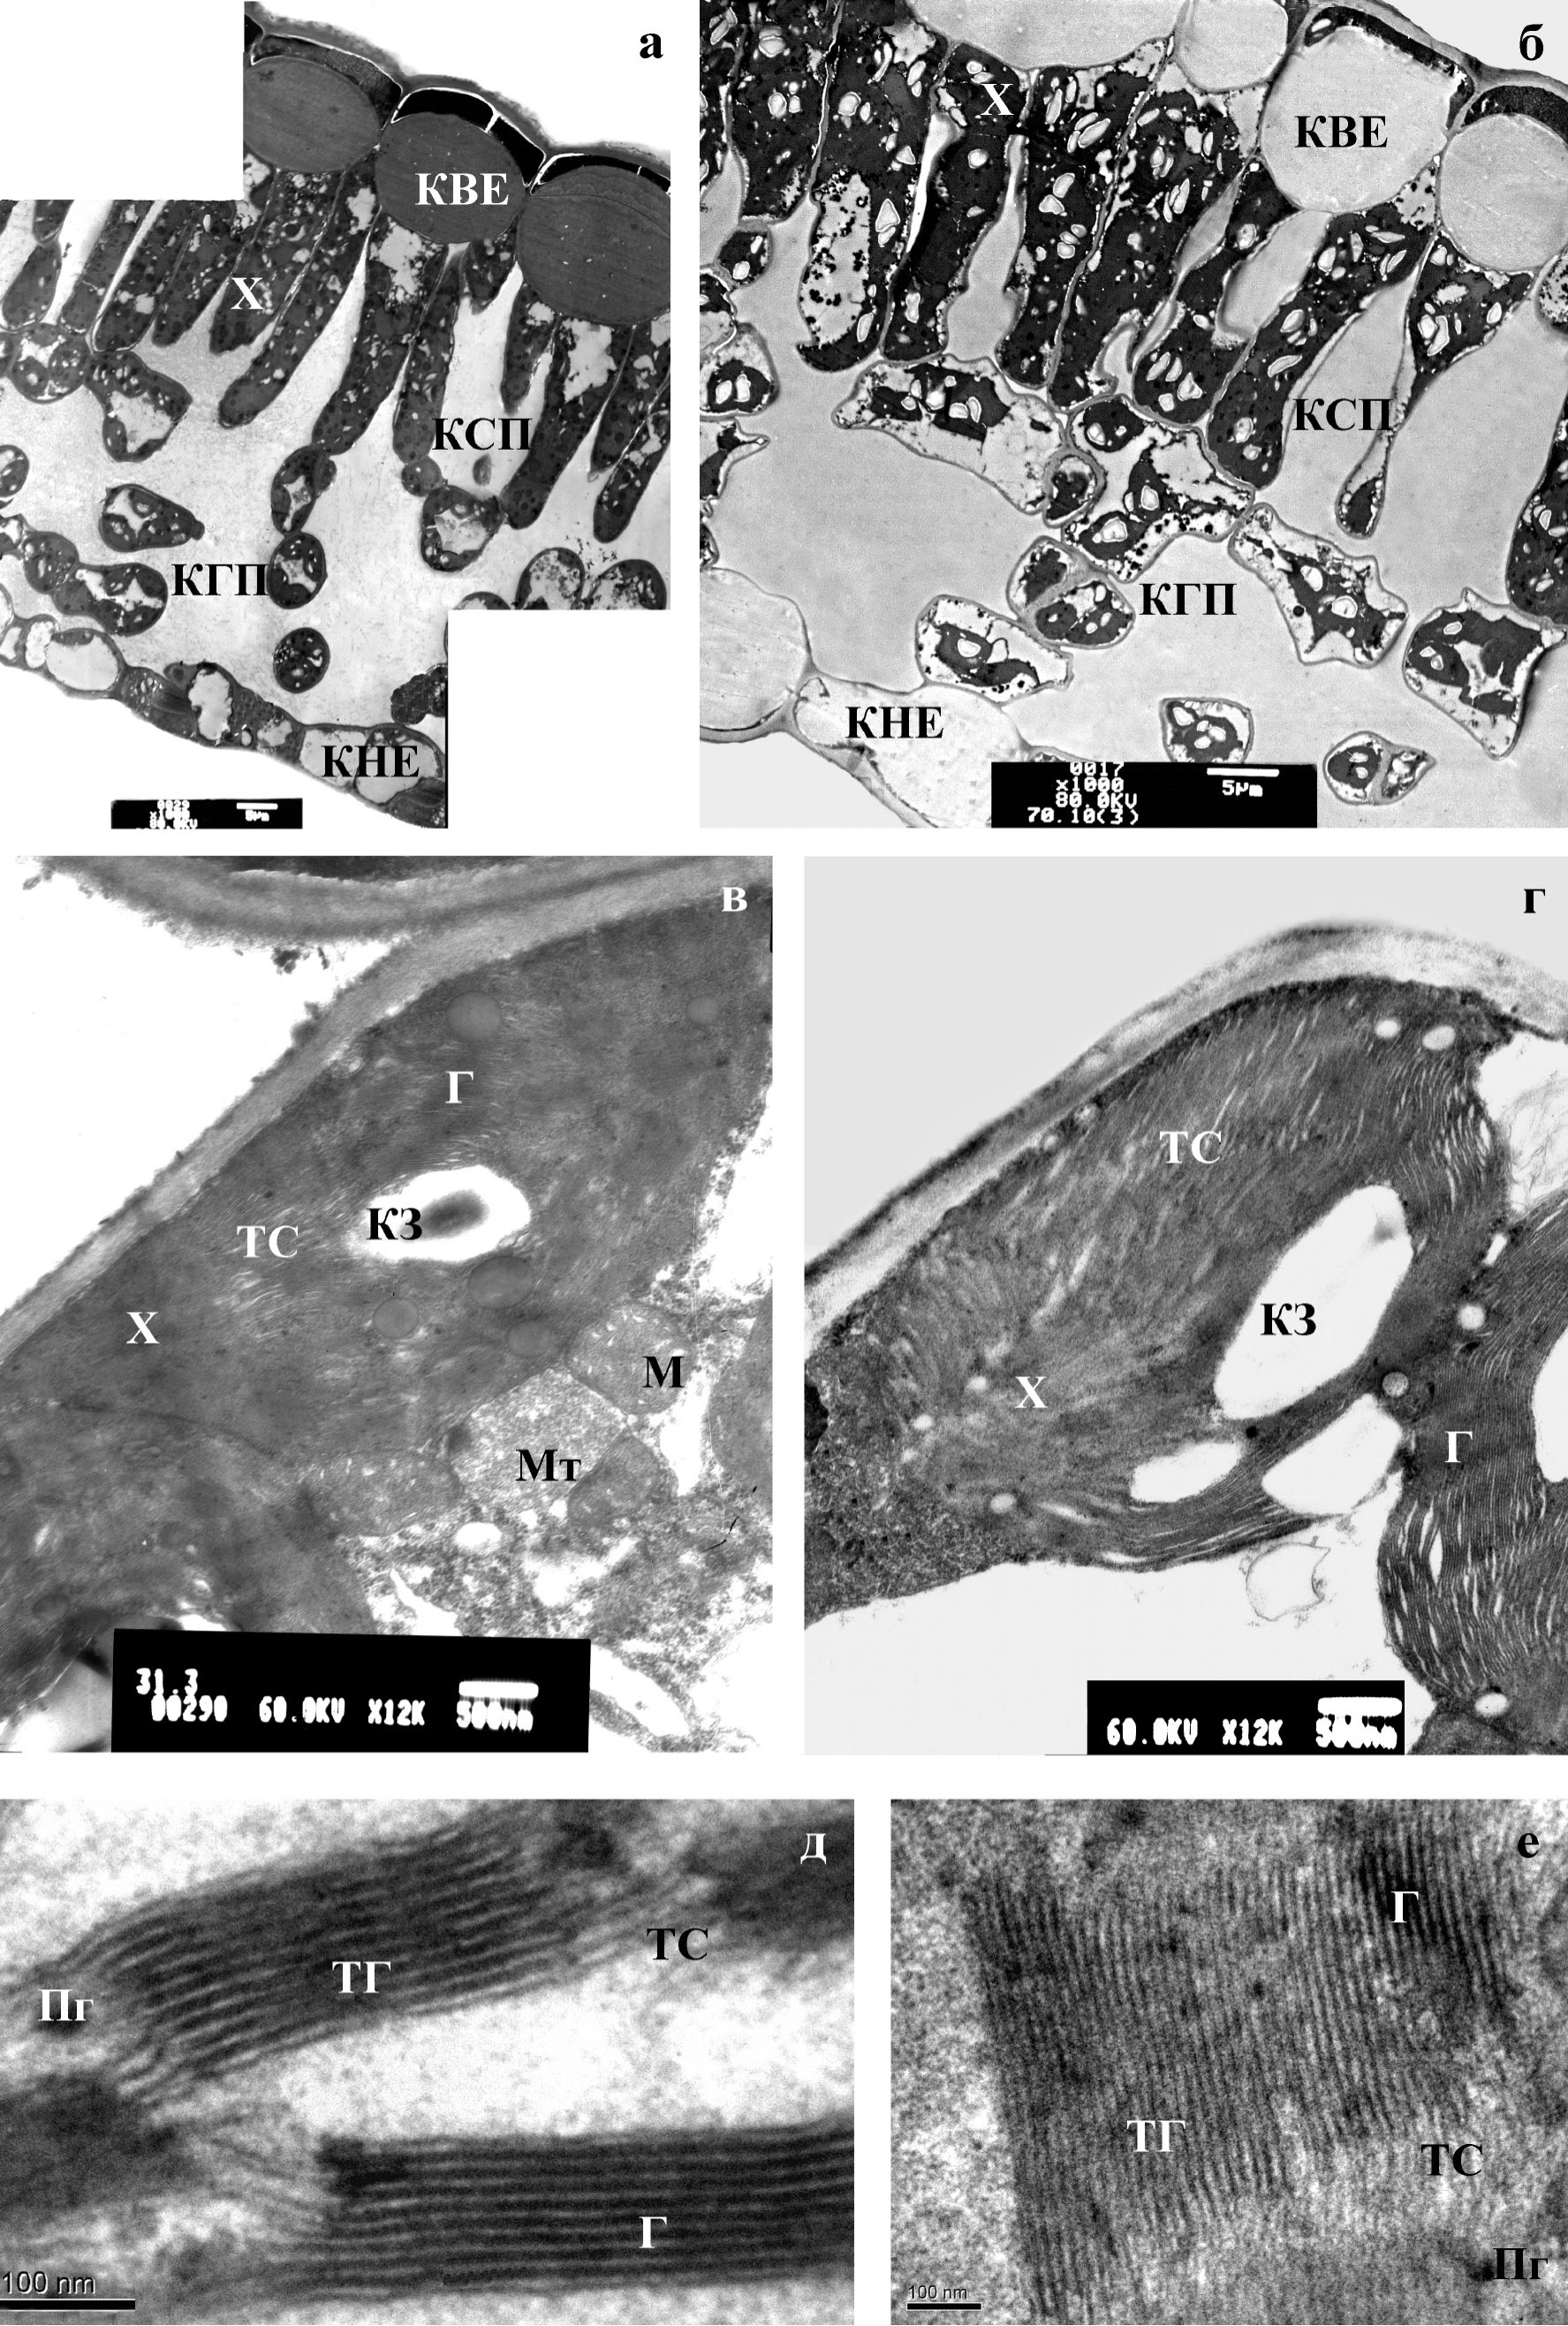 Fig. 1. Ultrastructure of cells and their fragments from upper (а, в, д) and lower (б, г, е) leaves of Acer platanoides. Fragment of leaf cross-section (а, б), chloroplasts (в, г), granae (д, е). Abbreviations: Г – grana, КВЭ – cell of upper epidermis, КГП – cell of spongy parenchyma, КЗ – starch grain, КНЭ – cell of lower epidermis, КСП – palisade cell, Пг – plastoglobule, ТГ – grana thylakoids, ТС – stroma thylakoids.